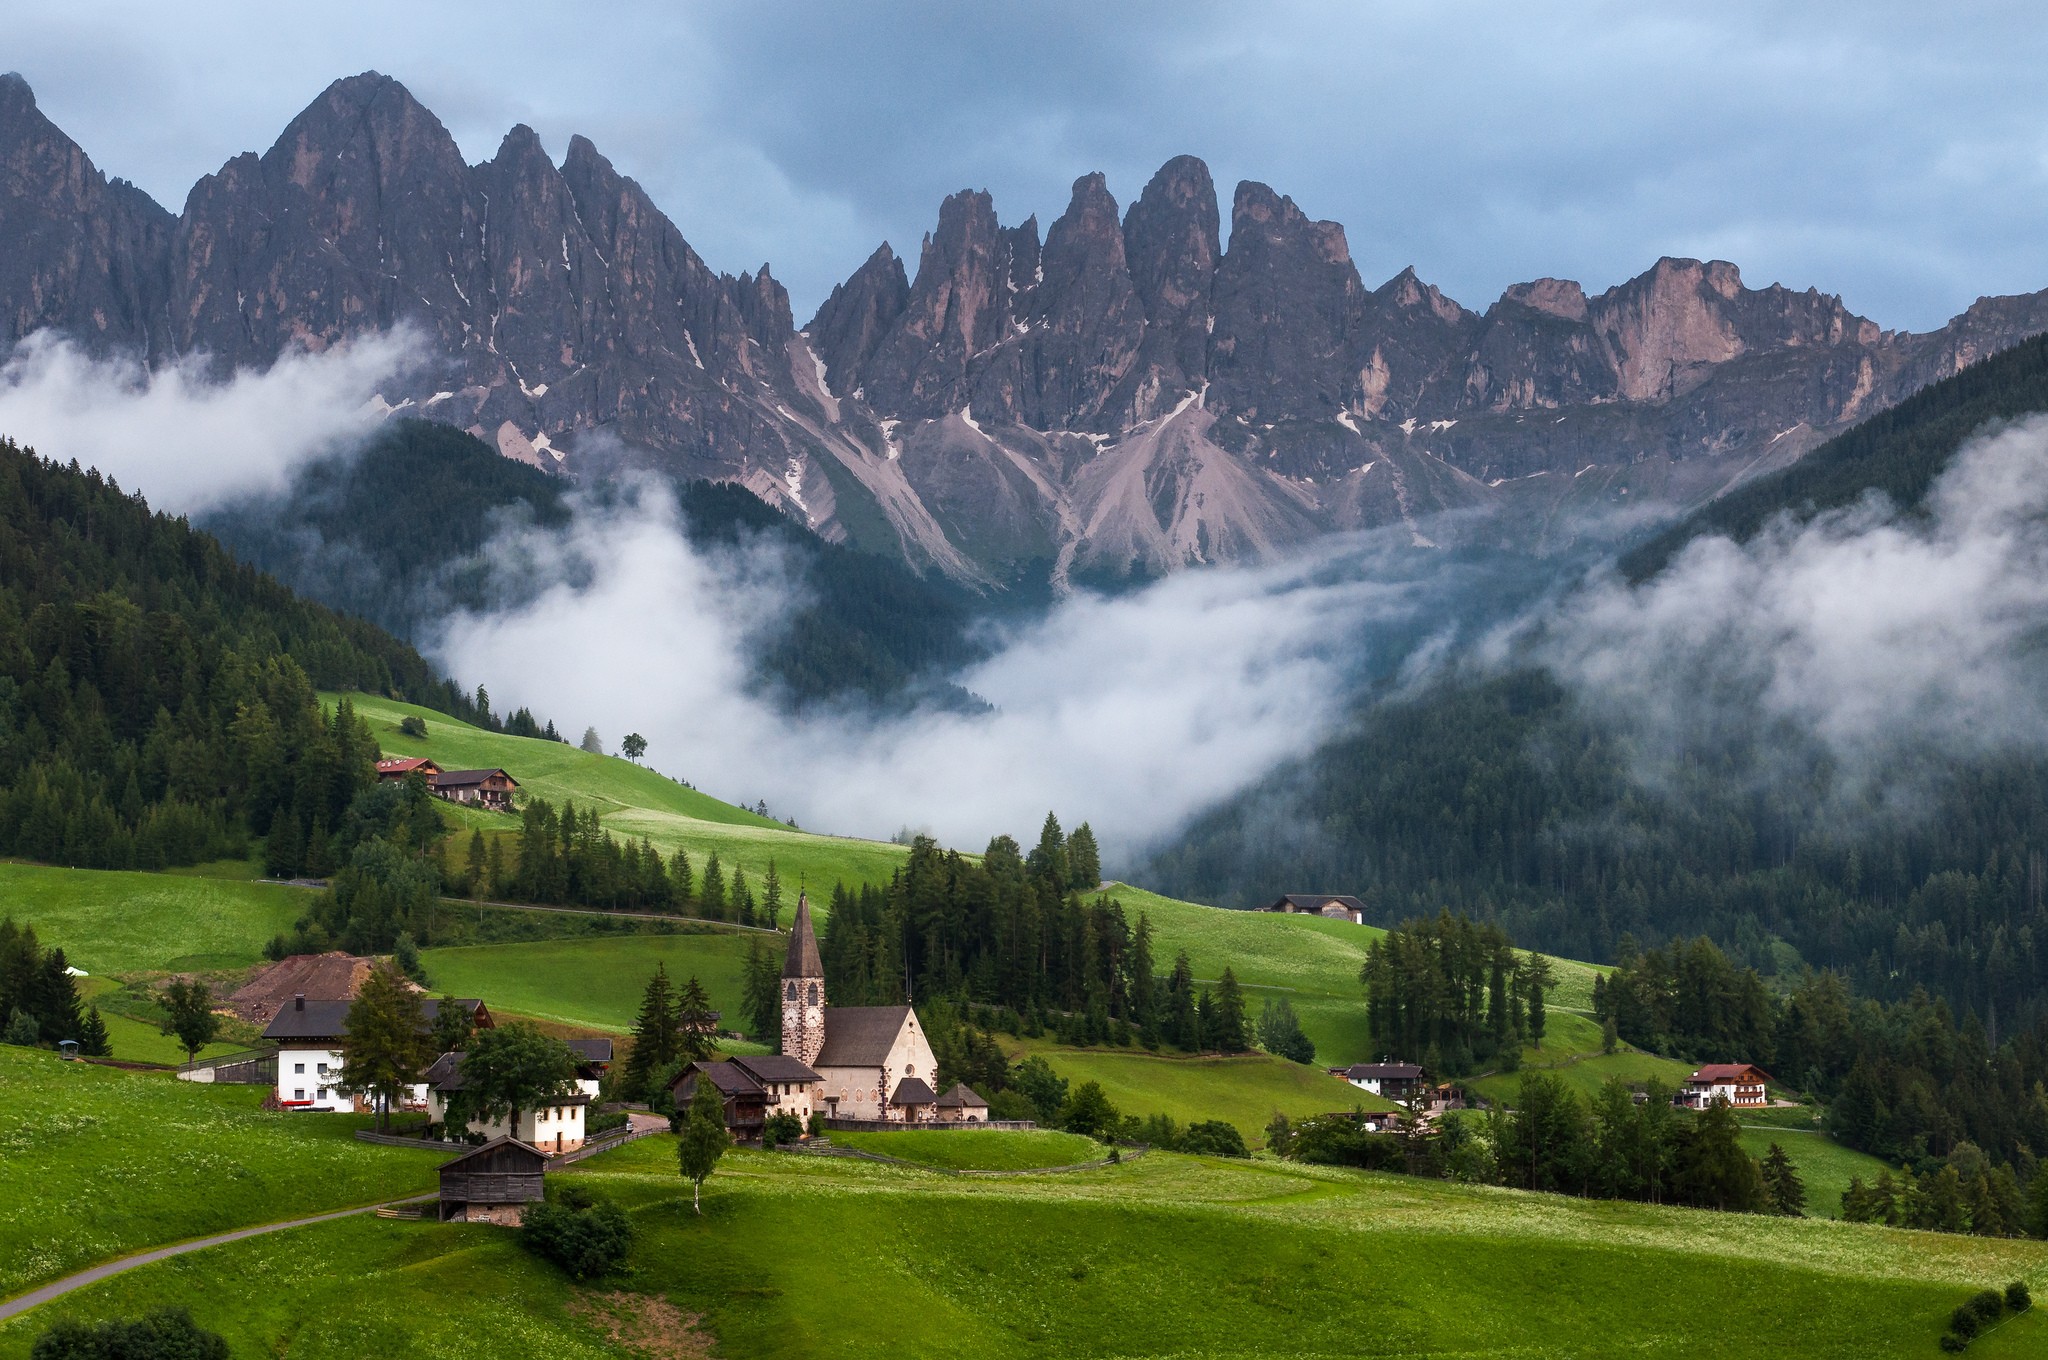 General 2048x1360 nature landscape mountains clouds trees Italy Dolomites mist forest church hills house field